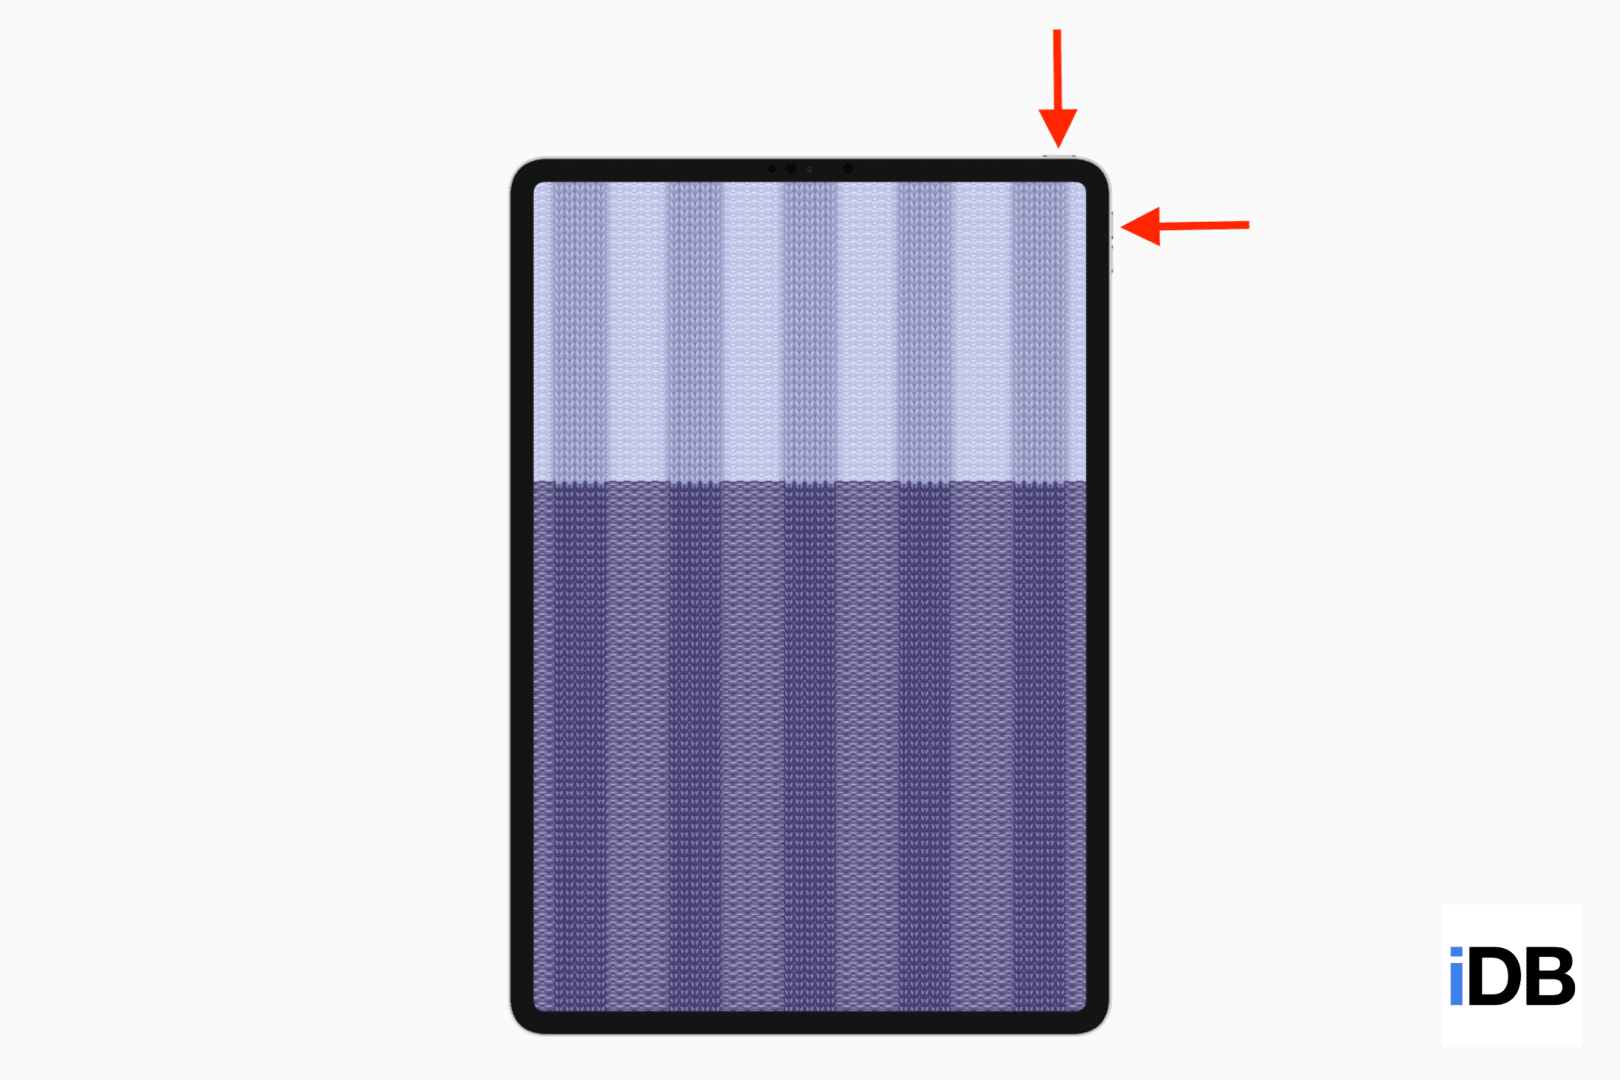 A mockup of iPad Pro with Face ID showing arrows pointing the buttons to take a screenshot